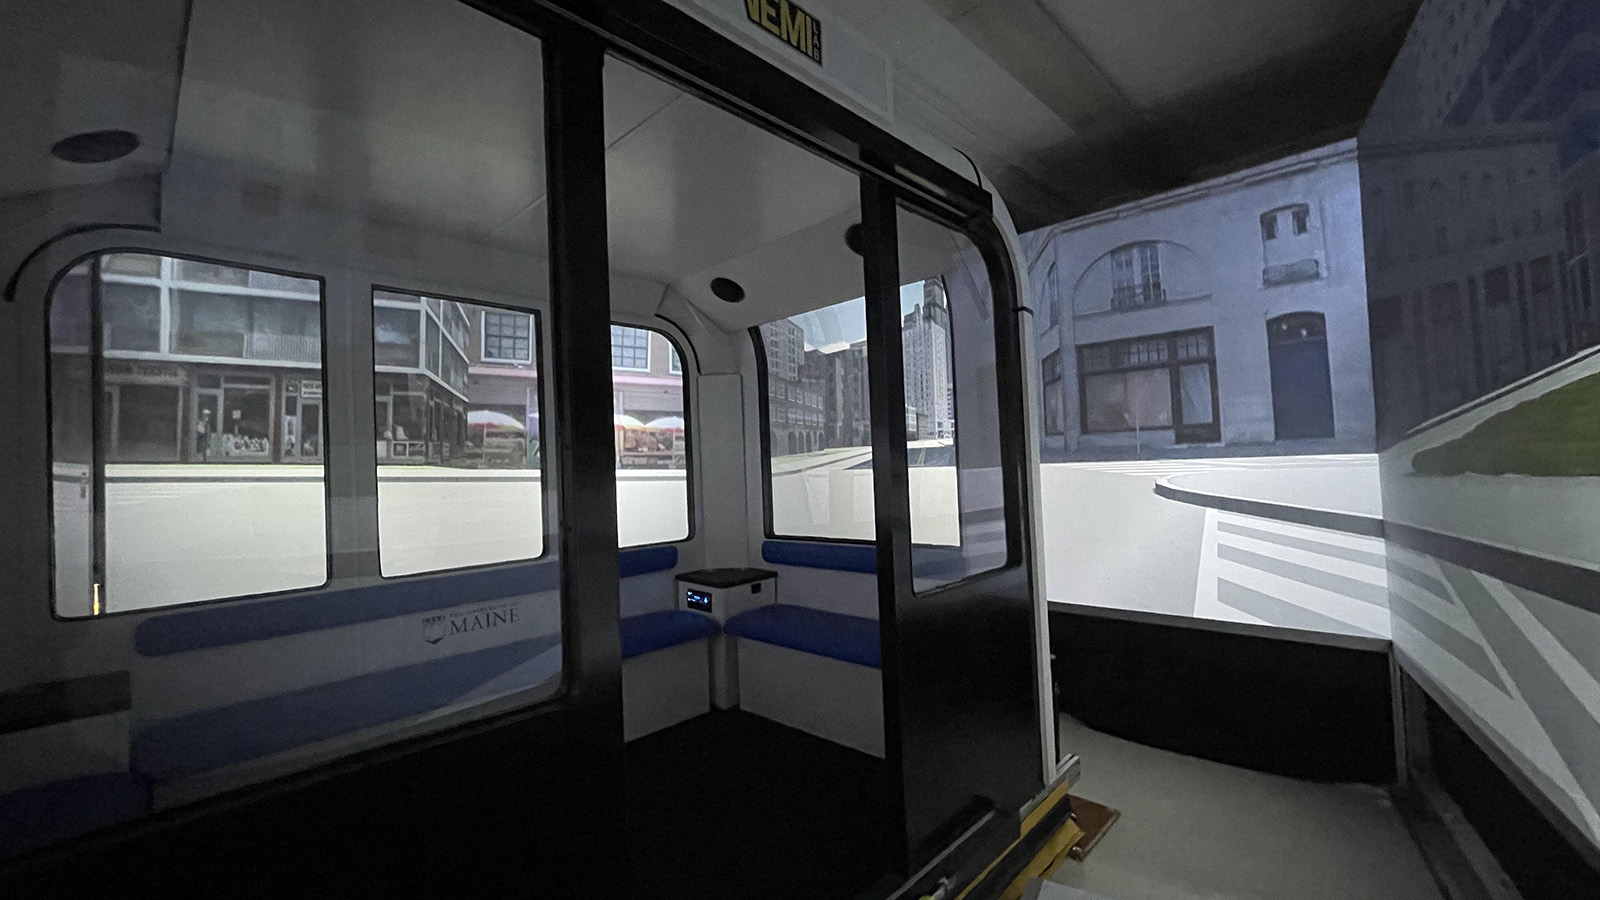 A full-size replica of an autonomous vehicle interior, in a room surrounded by screens simulating a street environment.